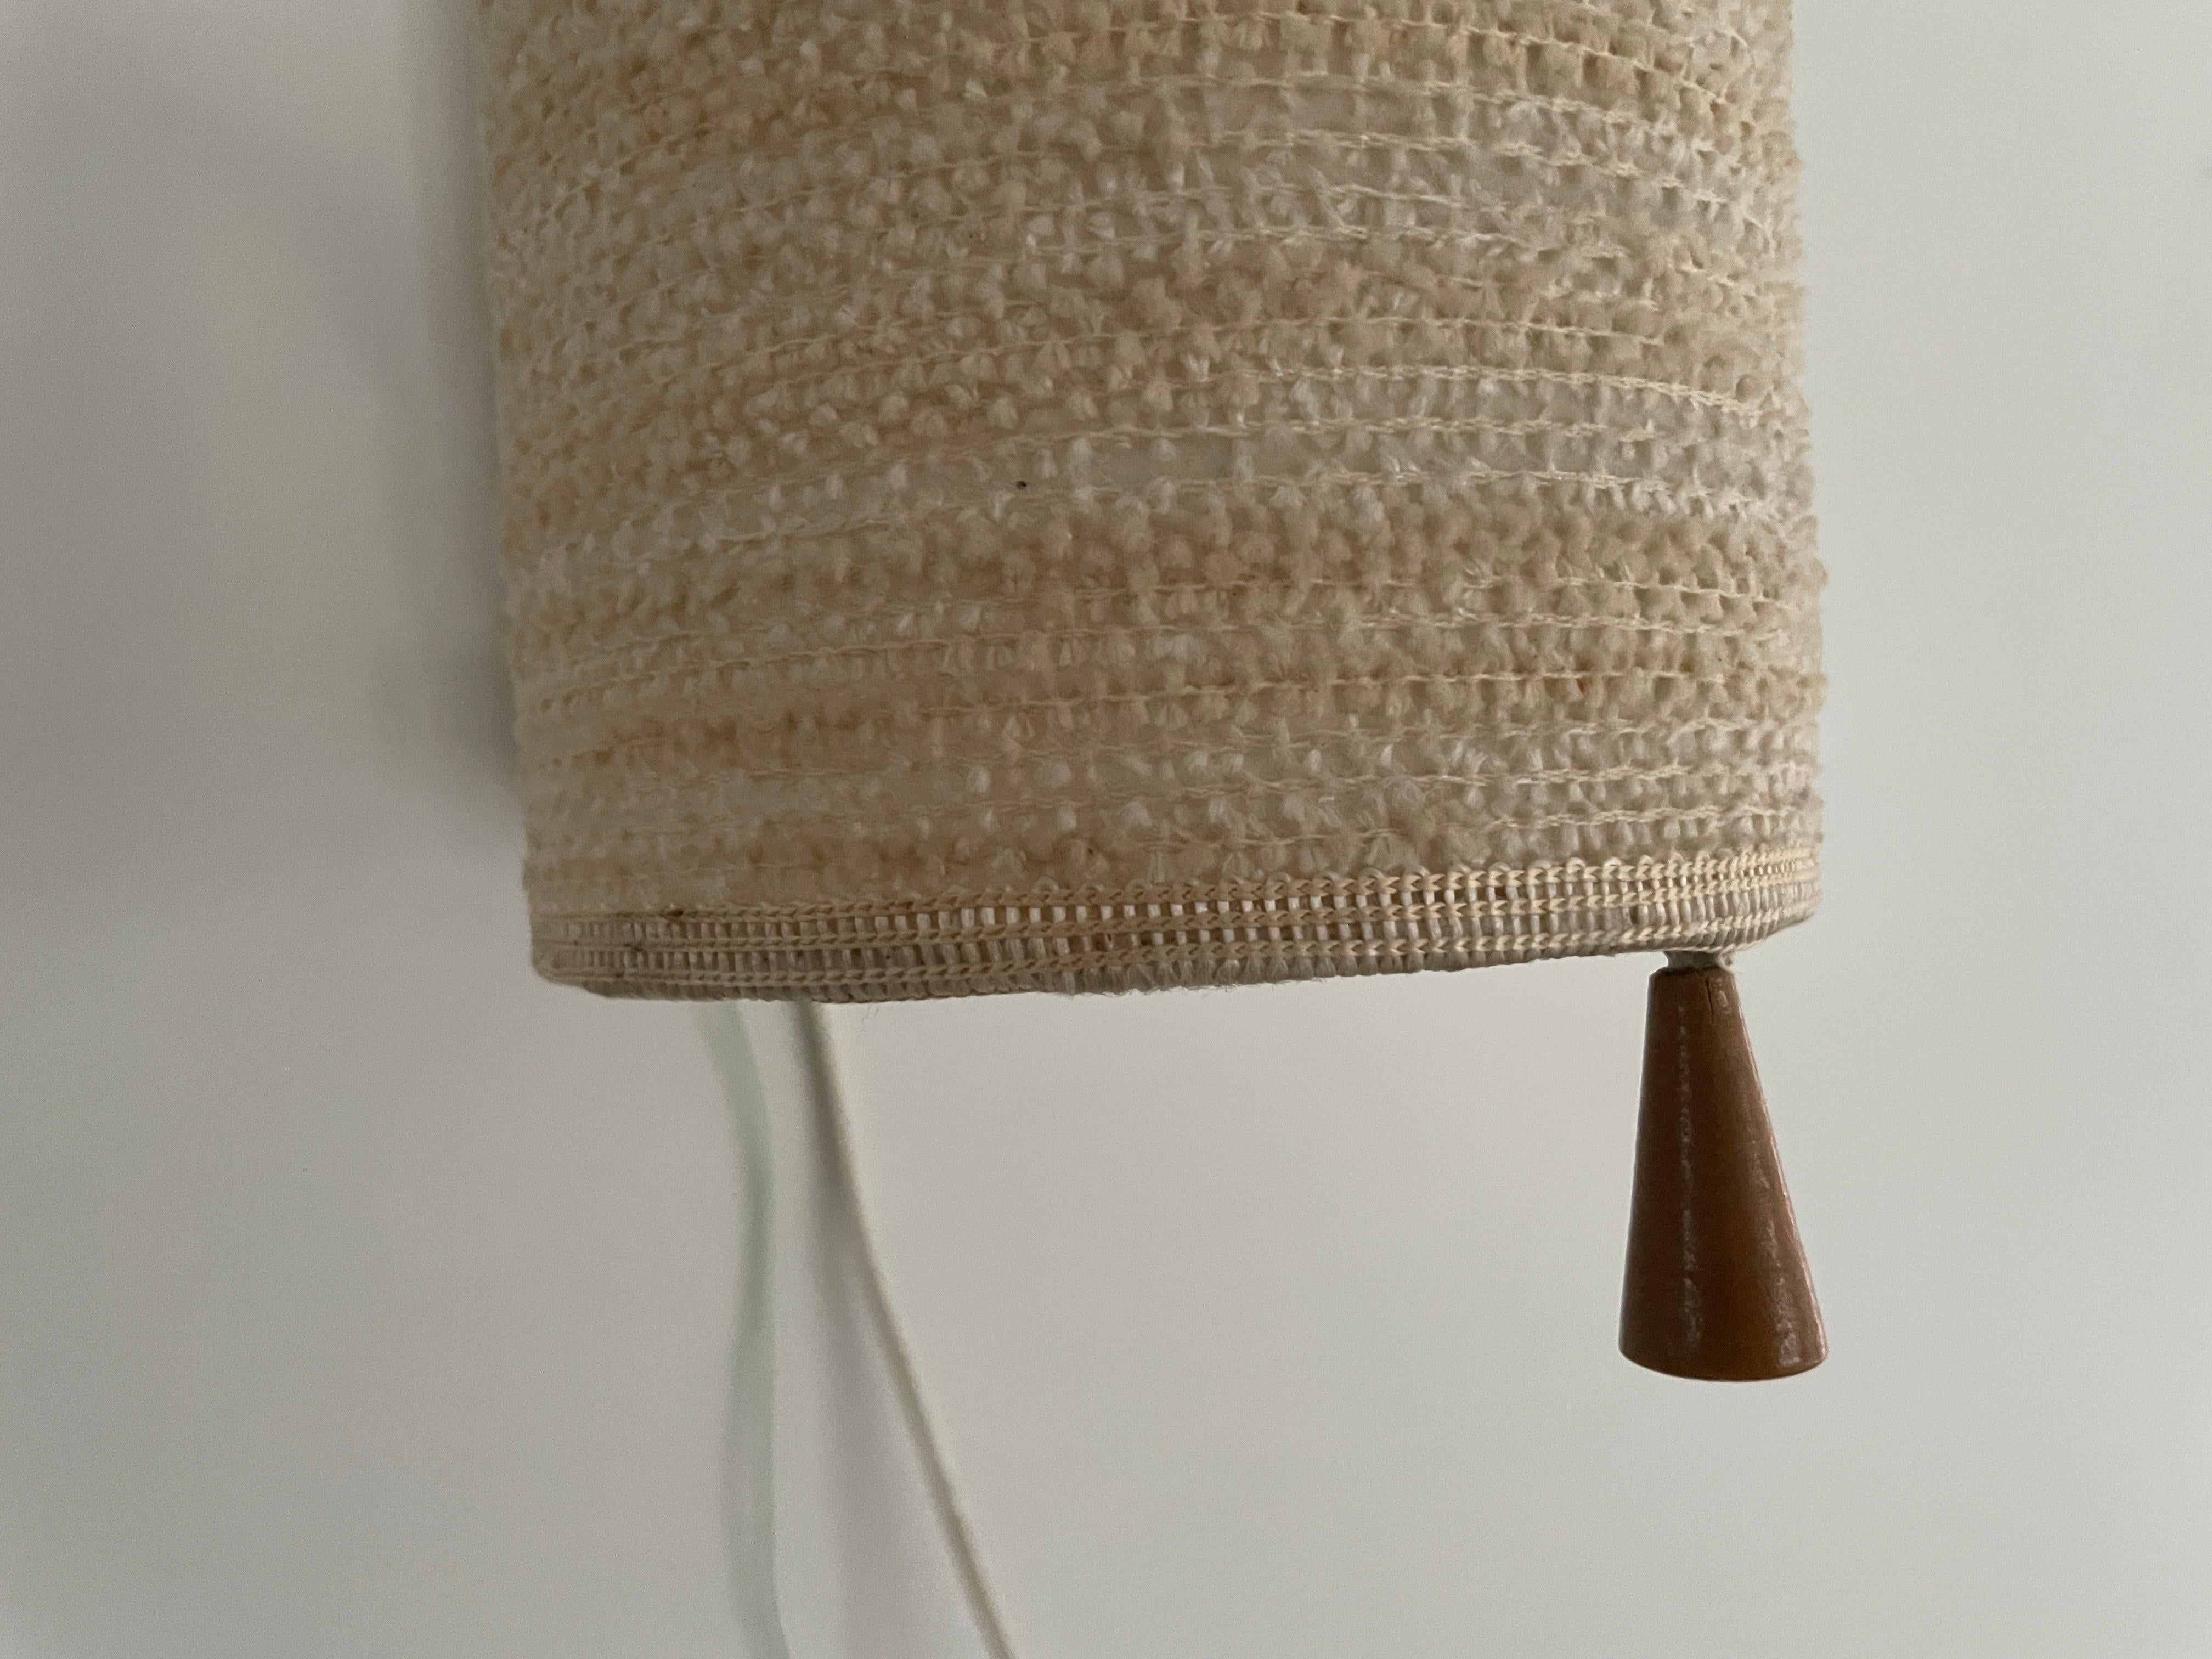 Fabric Shade and Wood Wall Lamp with Brass Neck, 1960s, Germany For Sale 3